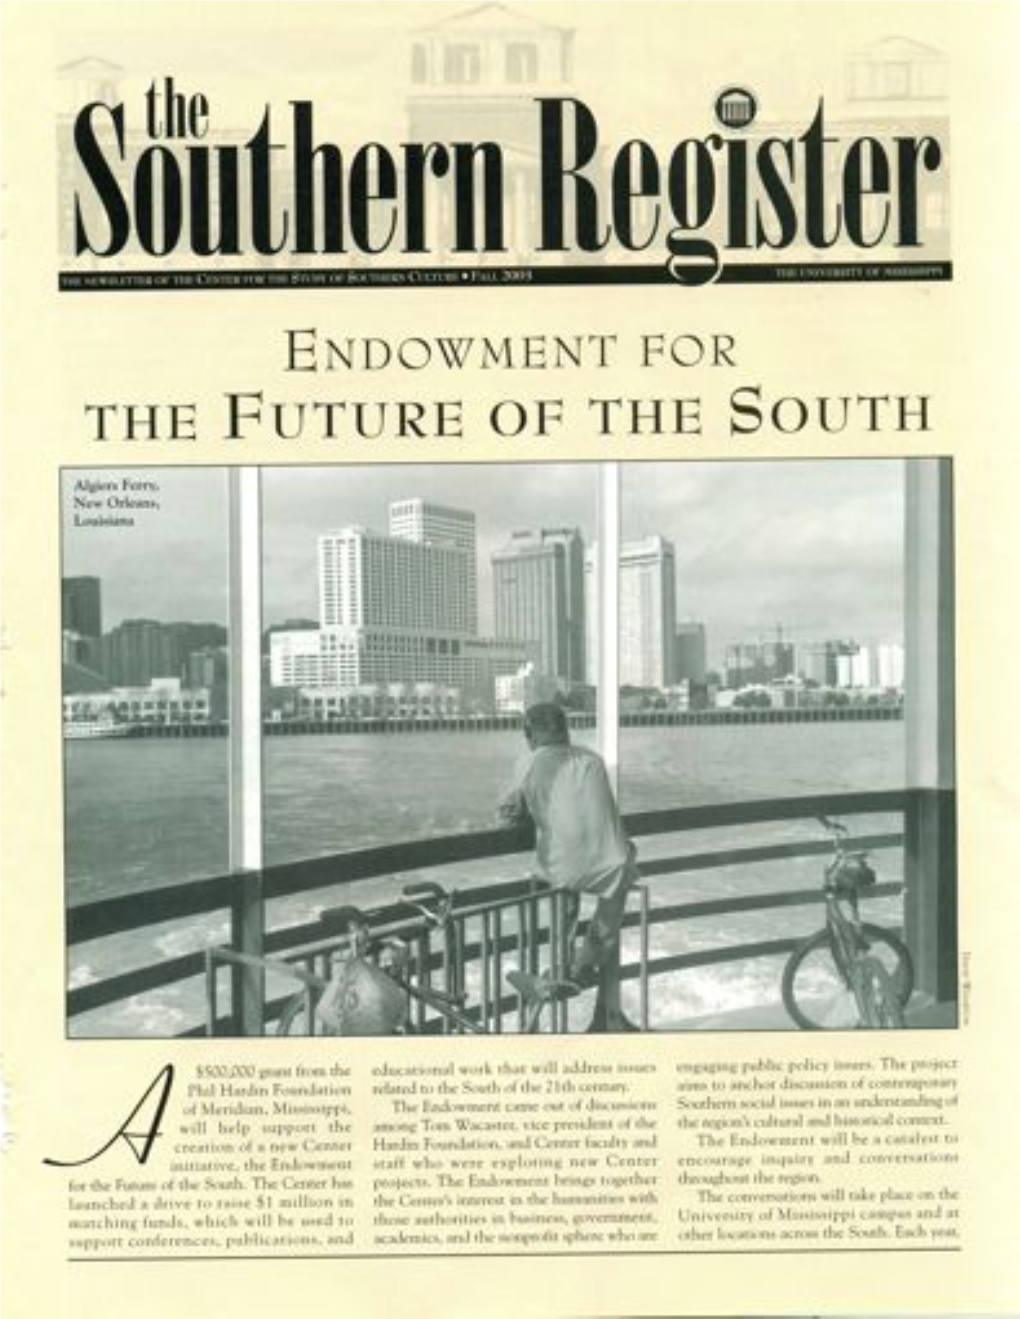 The Future of the South